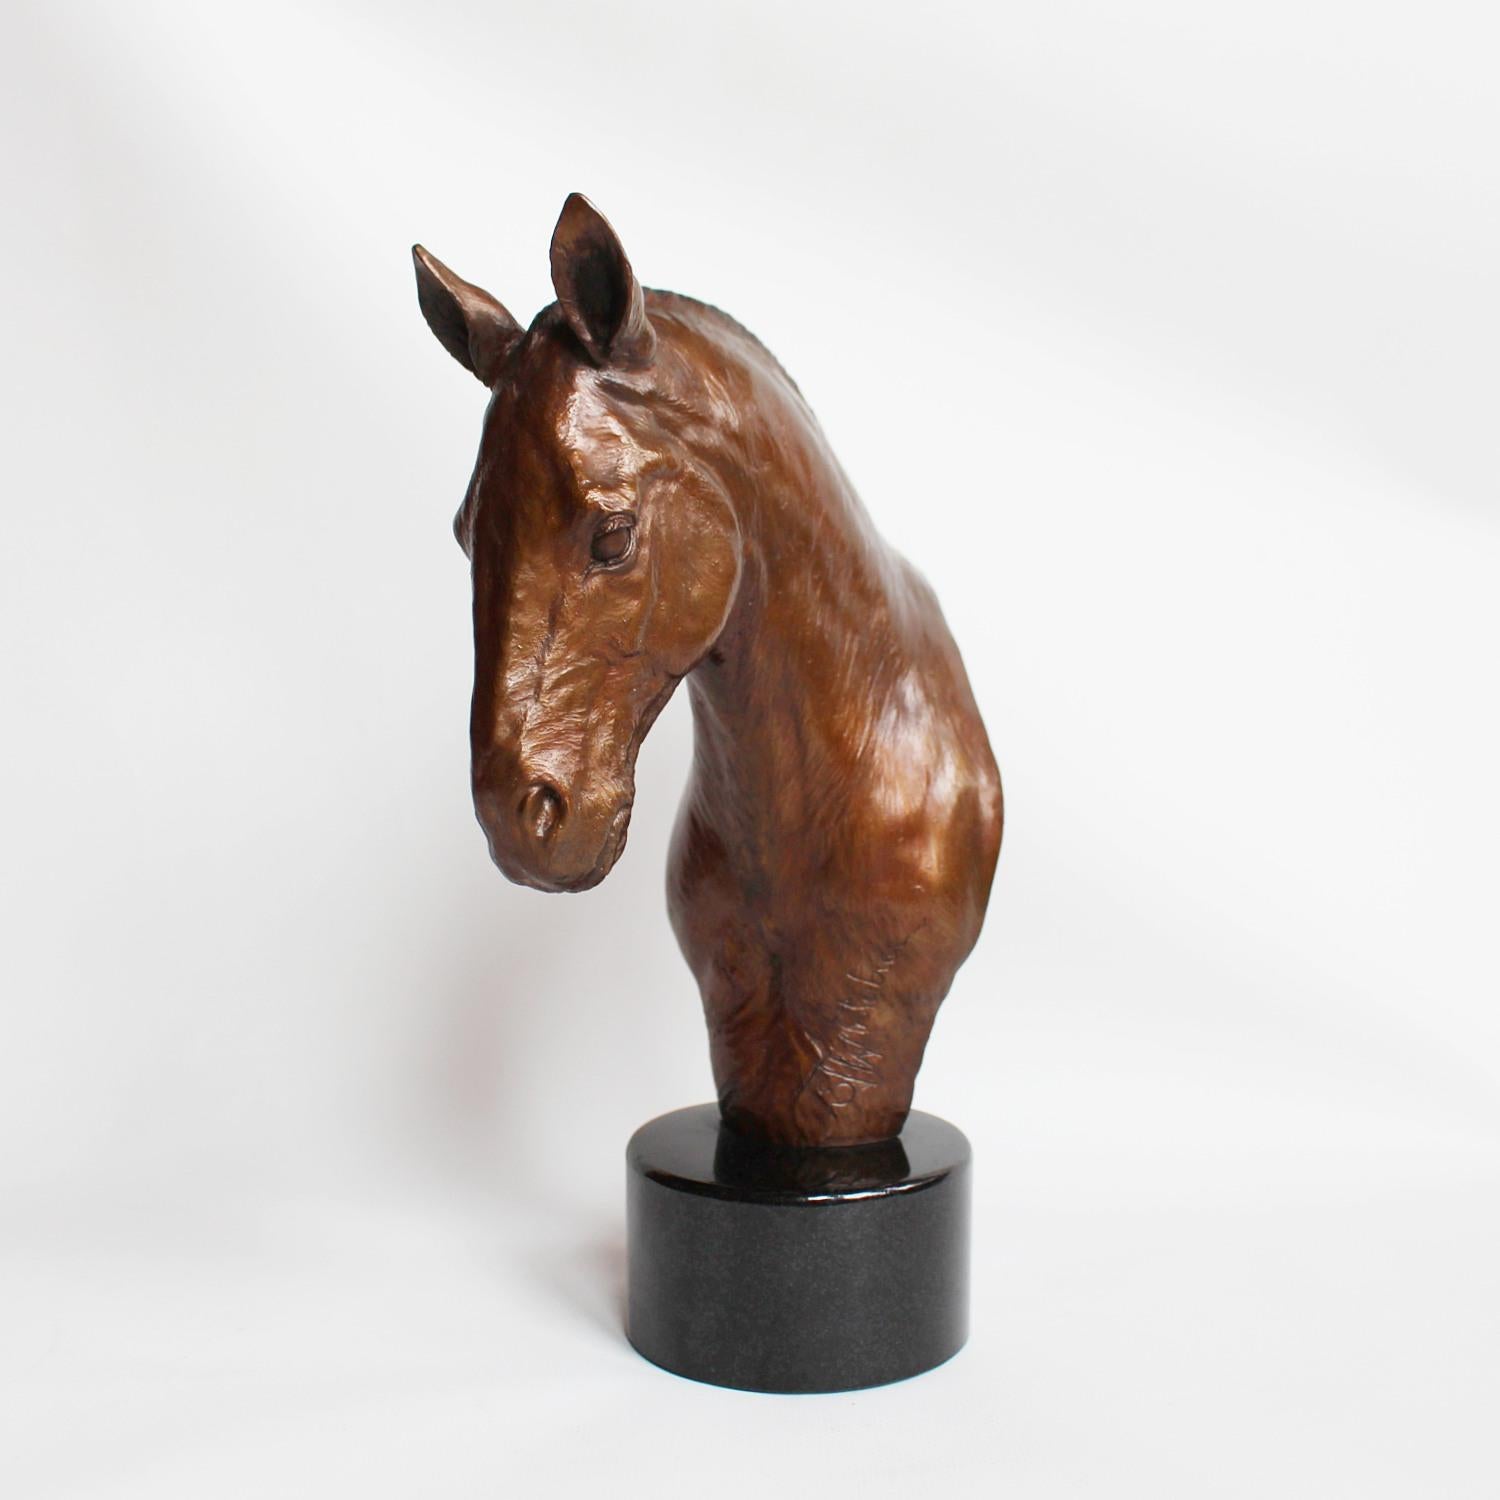 A contemporary patinated bronze study of a Cobb horse head by Stephen Winterburn (b.1959), set over a polished granite plinth. Limited edition of eight. Signed to cast.

Winterburn's works have been displayed in many prestigious galleries